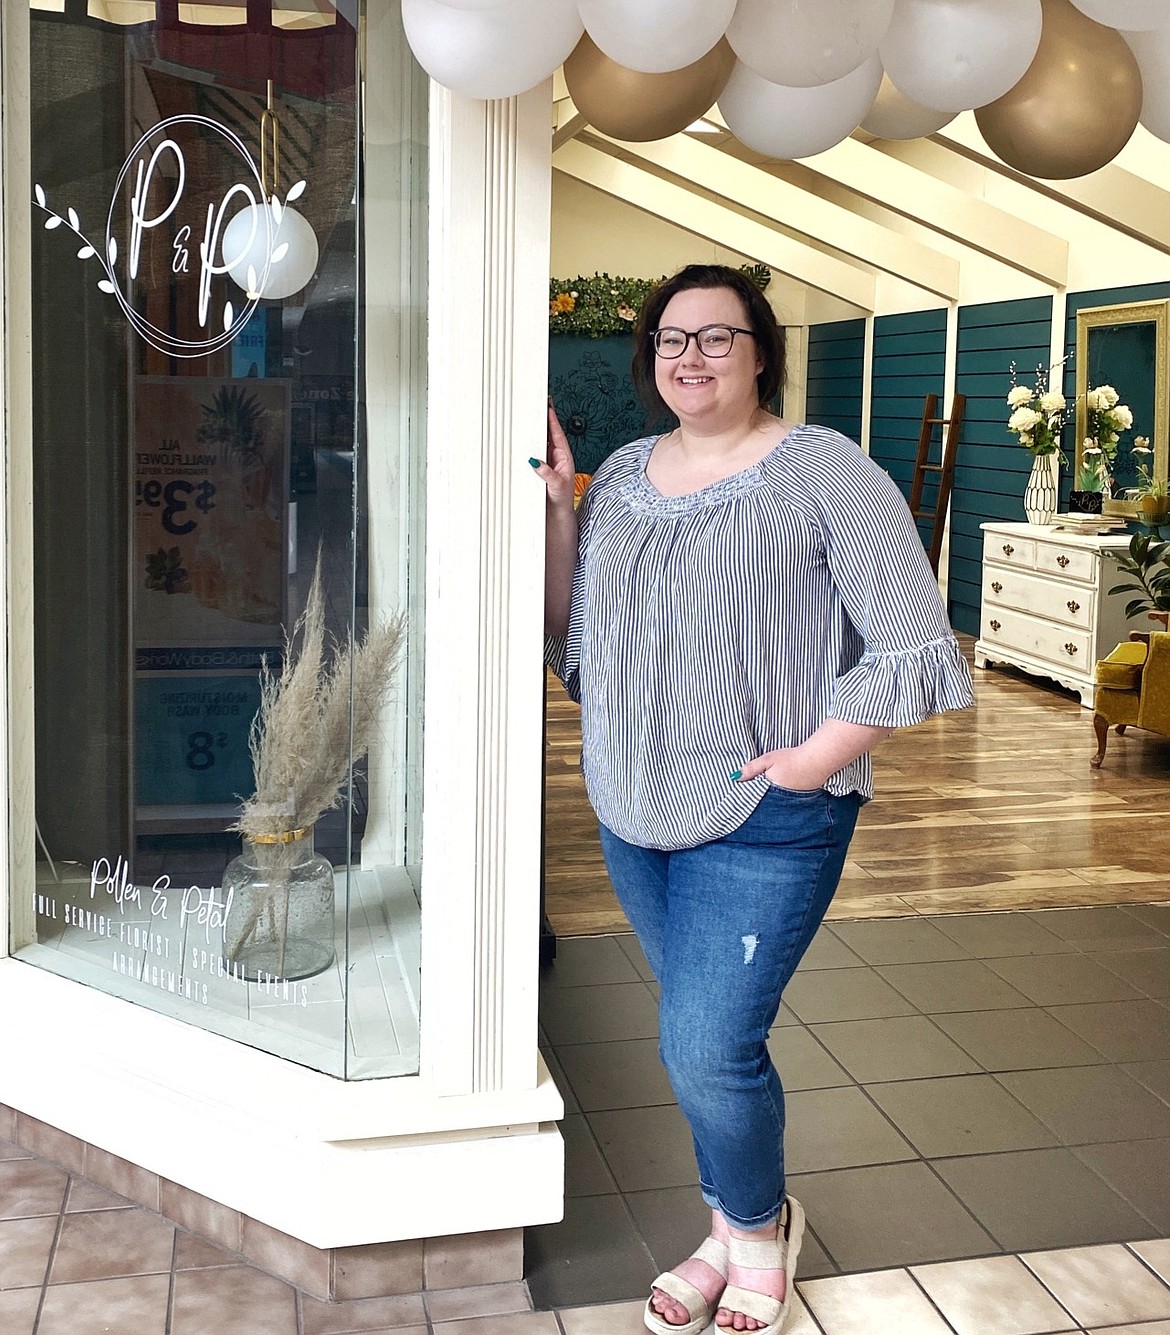 Courtesy photo
Owner Holly Brunner has opened the Pollen & Petals floral shop in Suite 1213 (next to Bath & Body Works) in Silver Lake Mall.